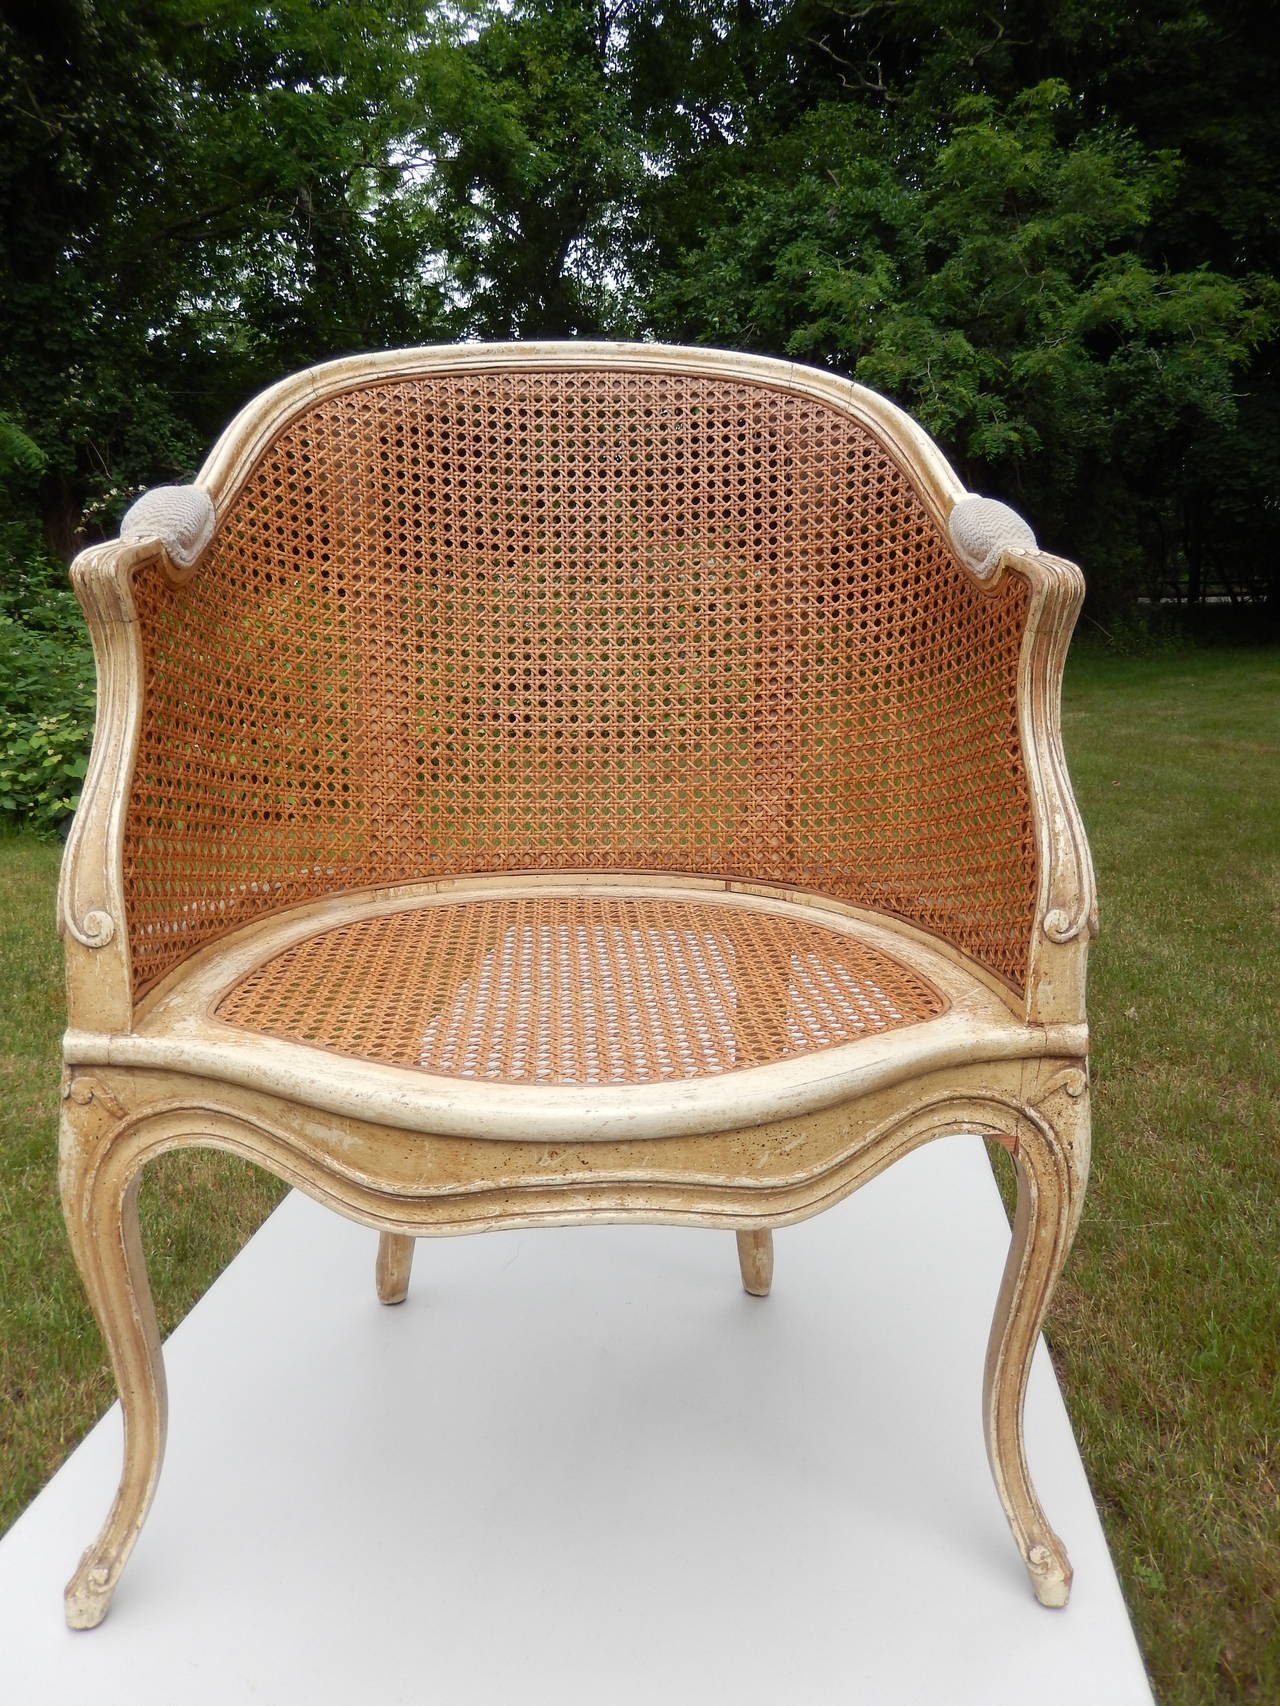 Pair of caned bergeres, natural distressed finish, caning in very good condition.
Barrel backs, padded armrests.